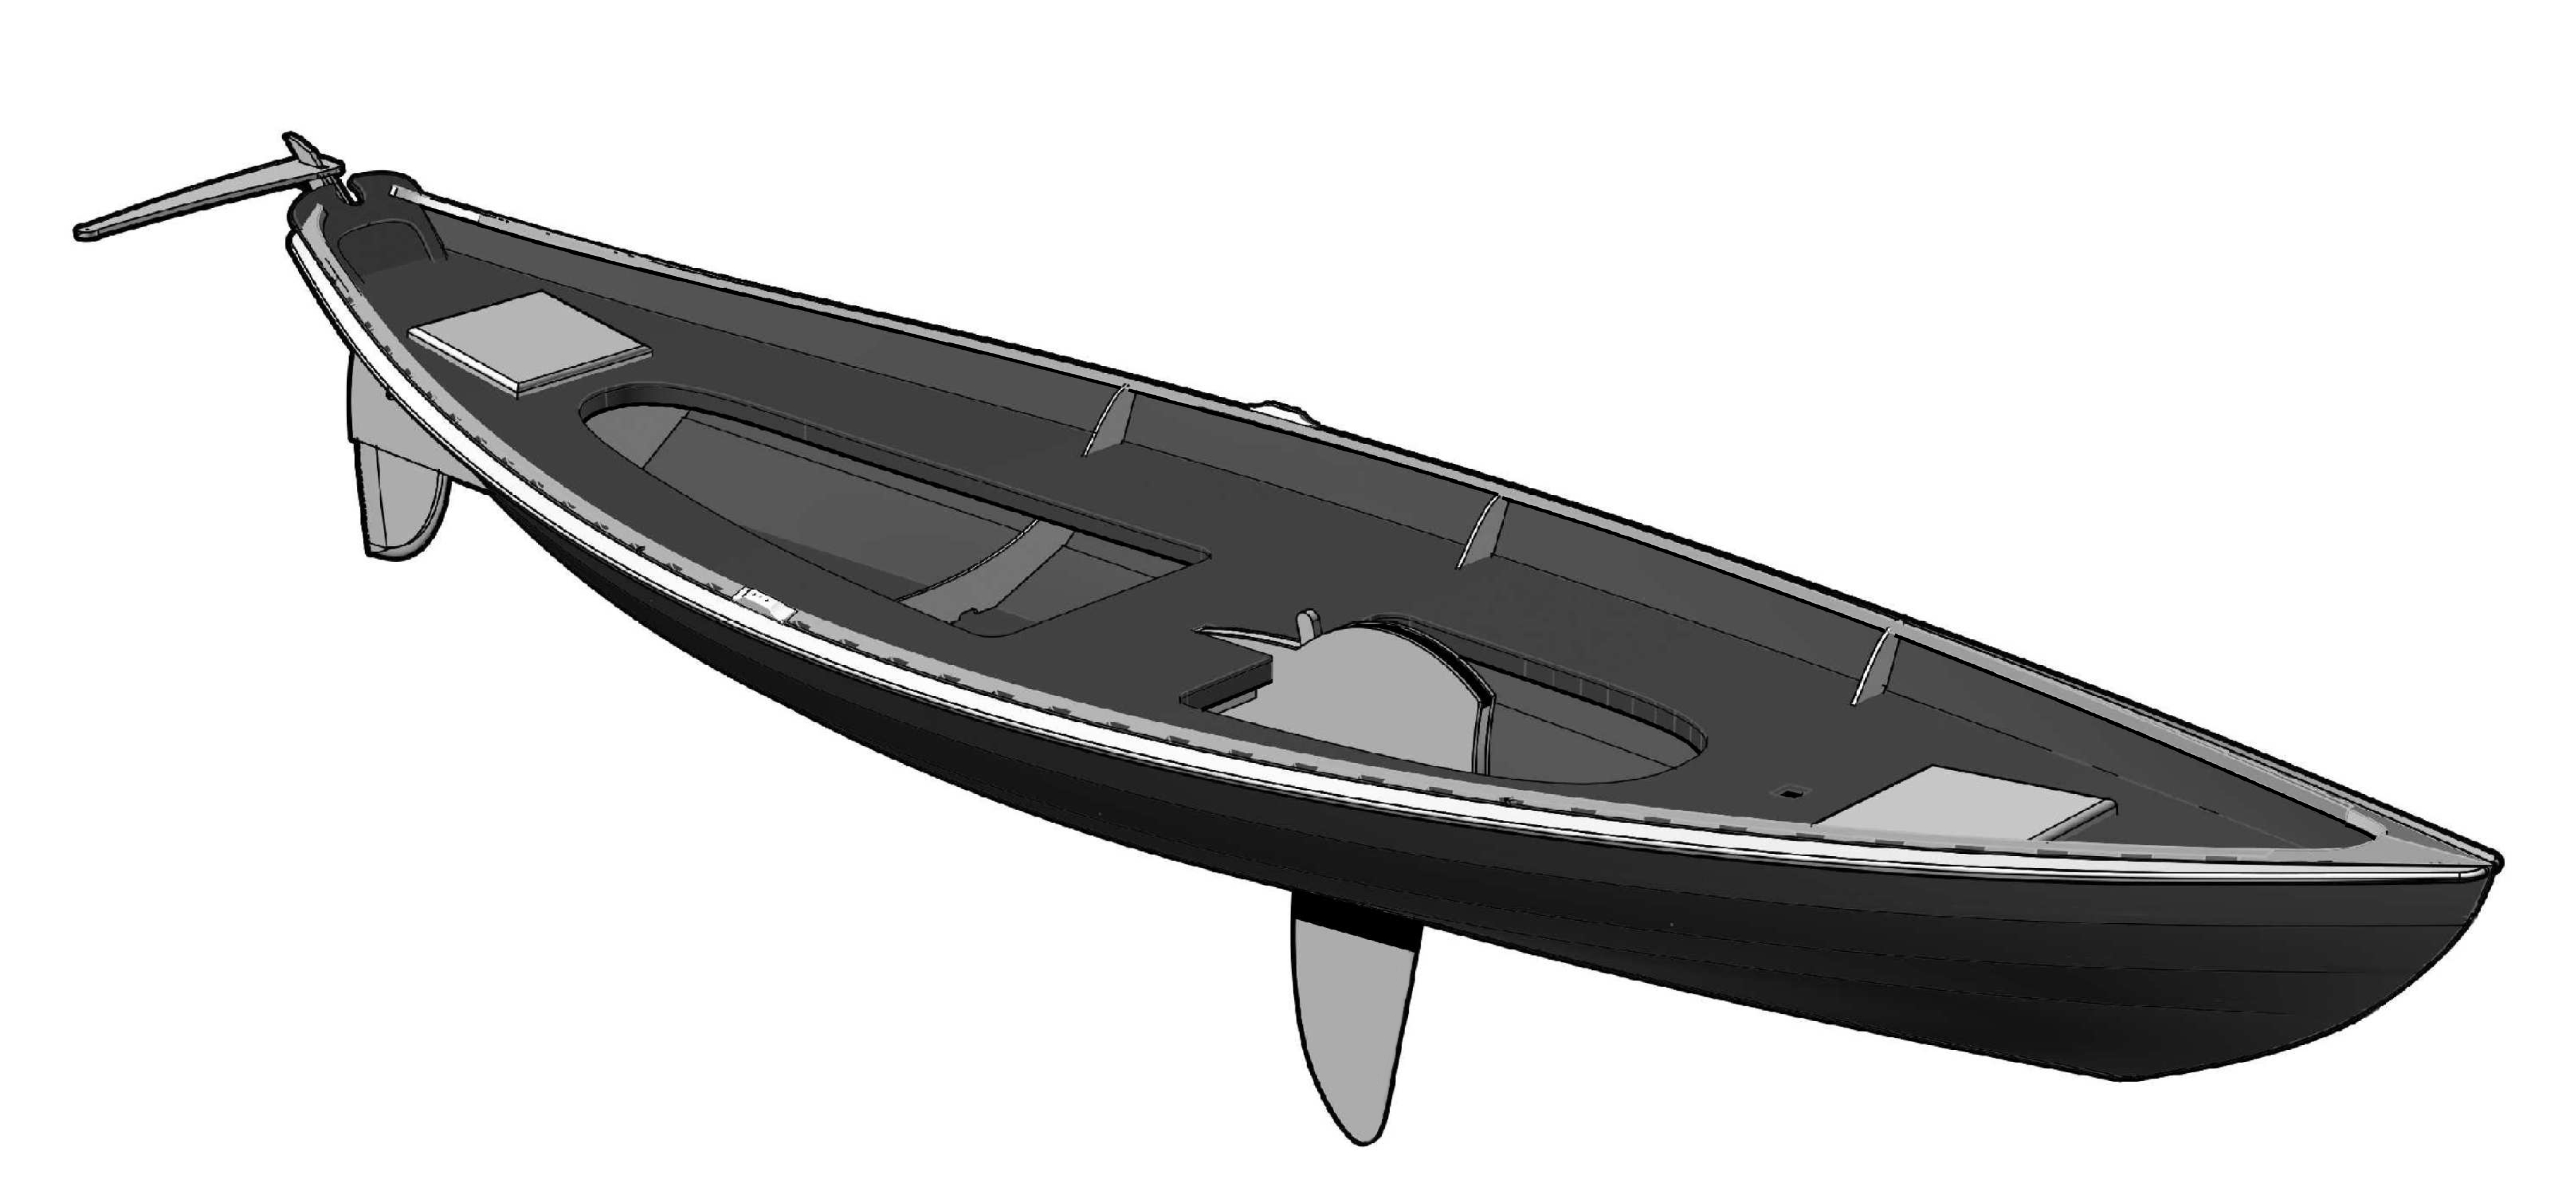 I need some help with ideas to mod my 14' flat bottom boat